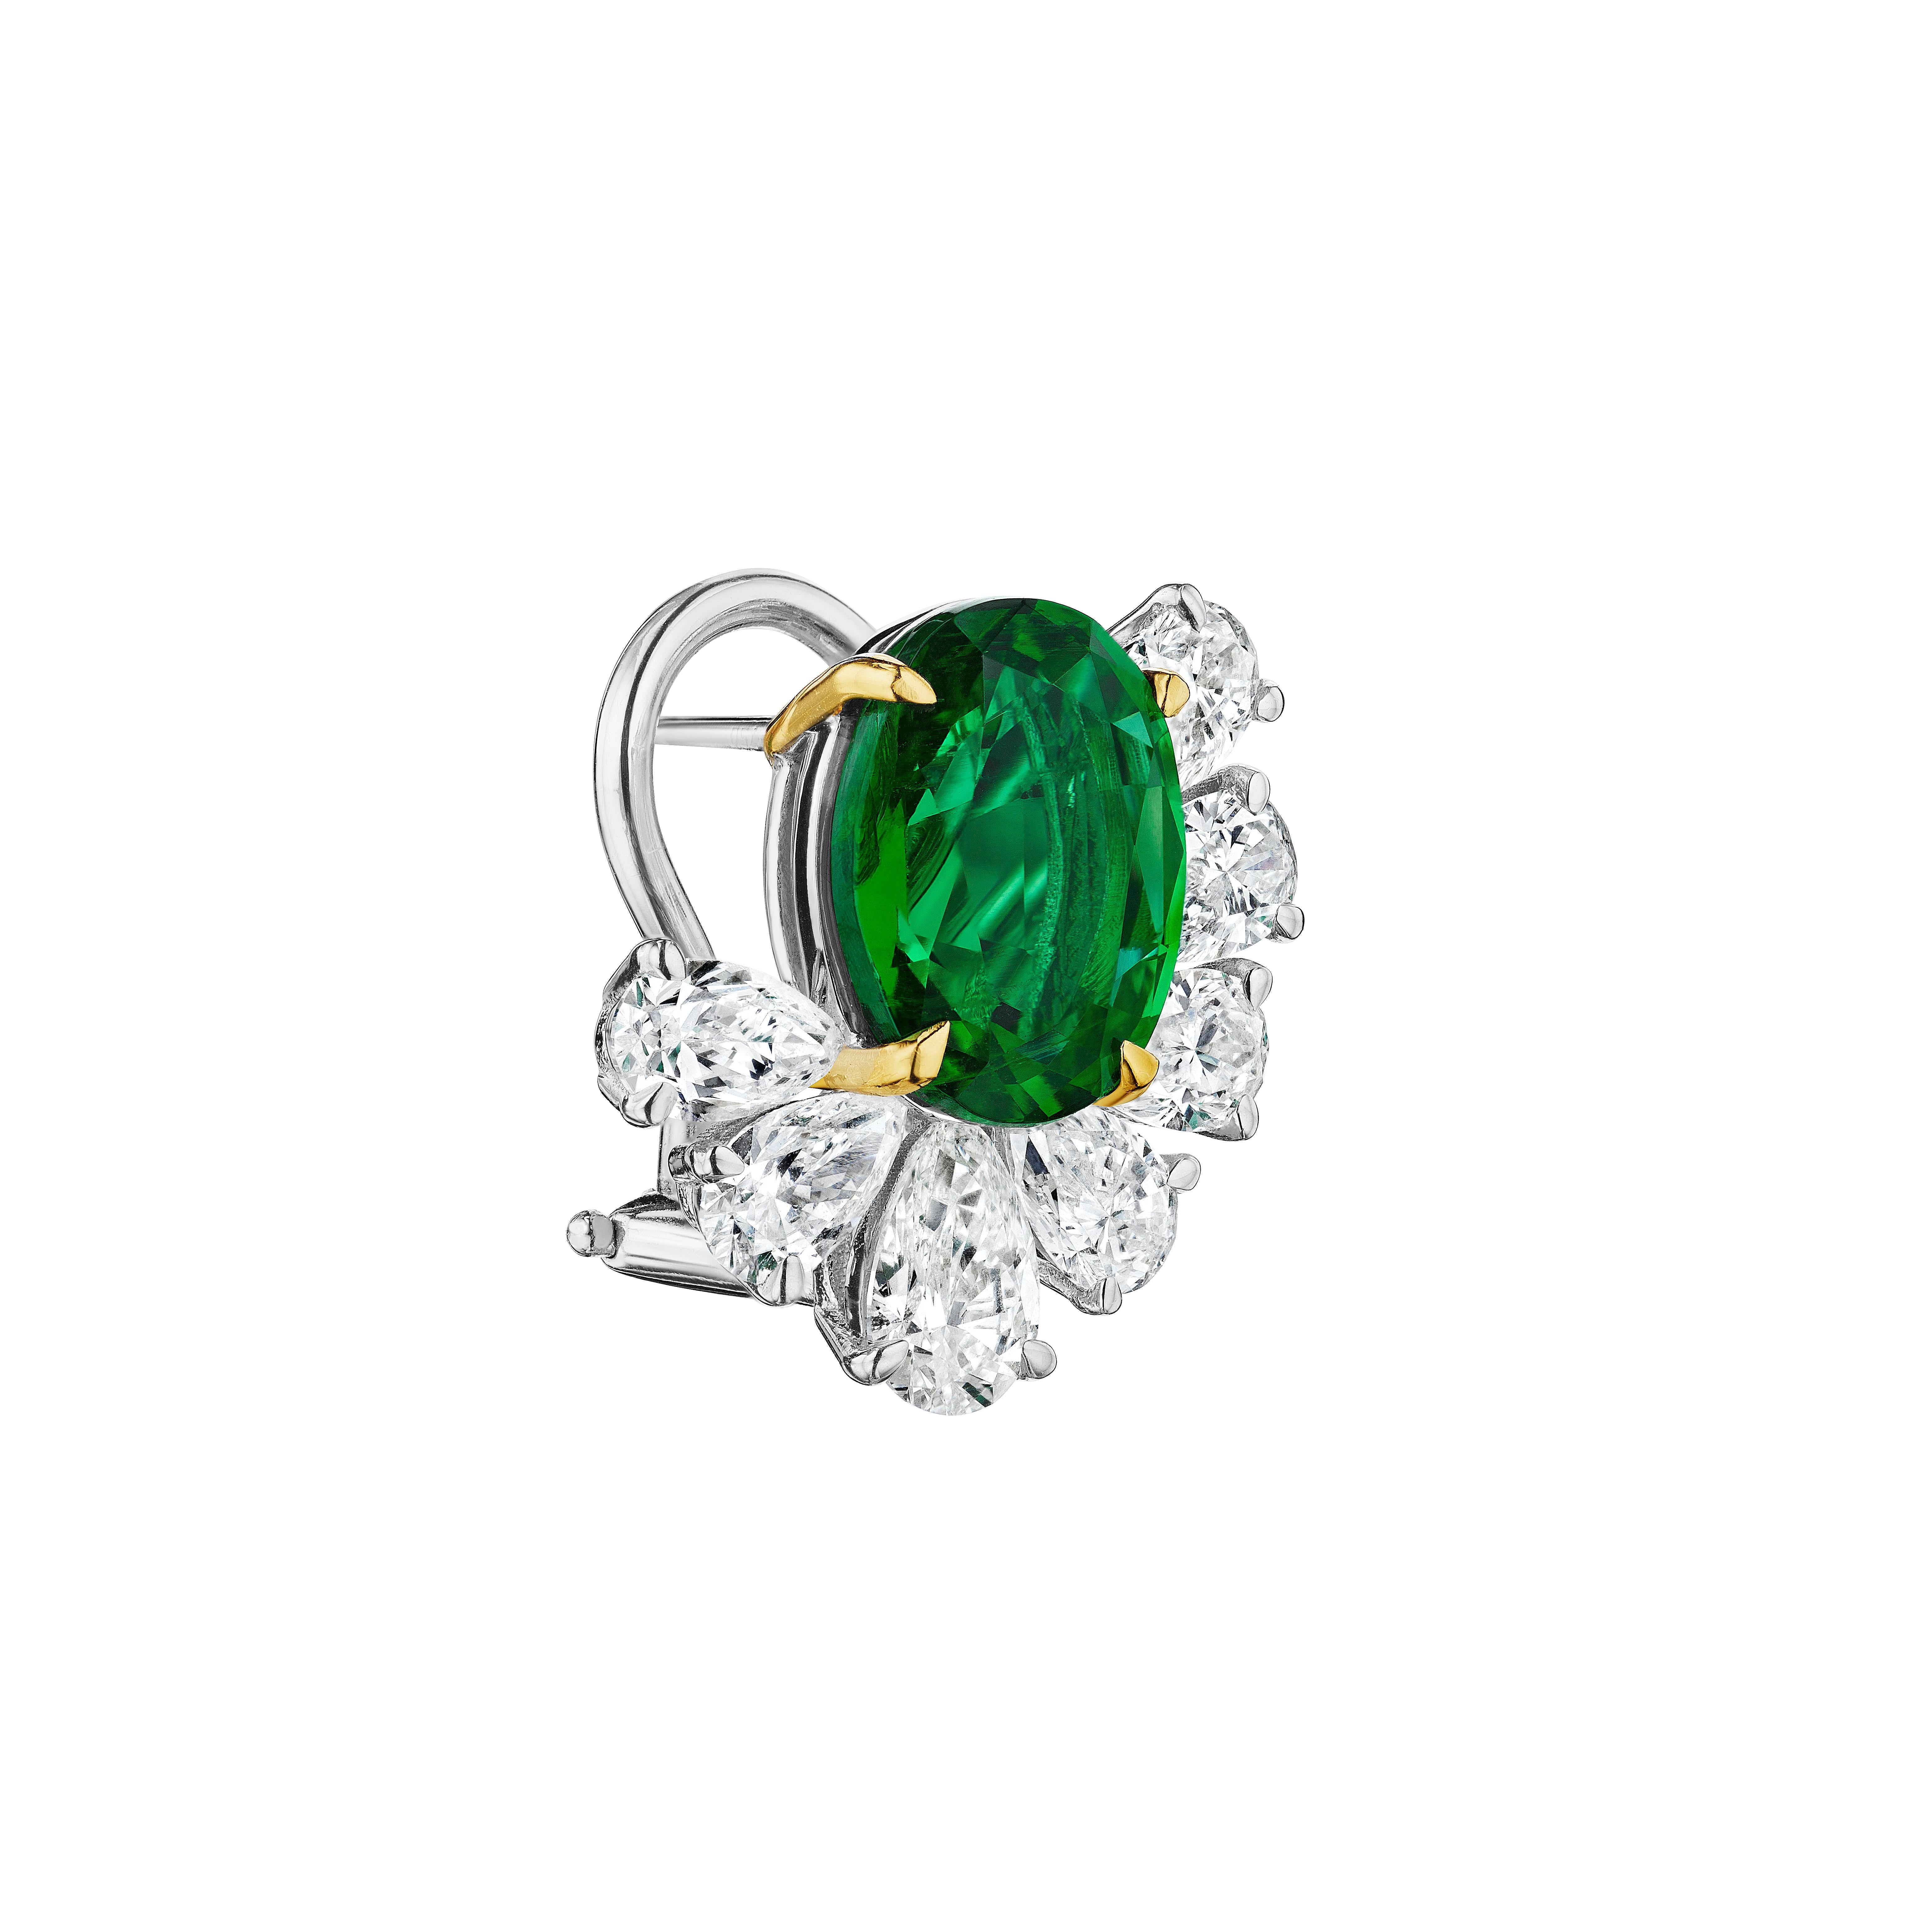 •	18KT Two Tone
•	9.86 carats
•	Sold as a pair

•	Number of Oval Emeralds: 2
•	Carat Weight: 6.20ctw
•	Color: Vivid Green
•	Certificate: CDC: 17065571

•	Number of Pear Shape Diamonds: 14
•	Carat Weight: 3.66ctw

•	This pair of earrings features a